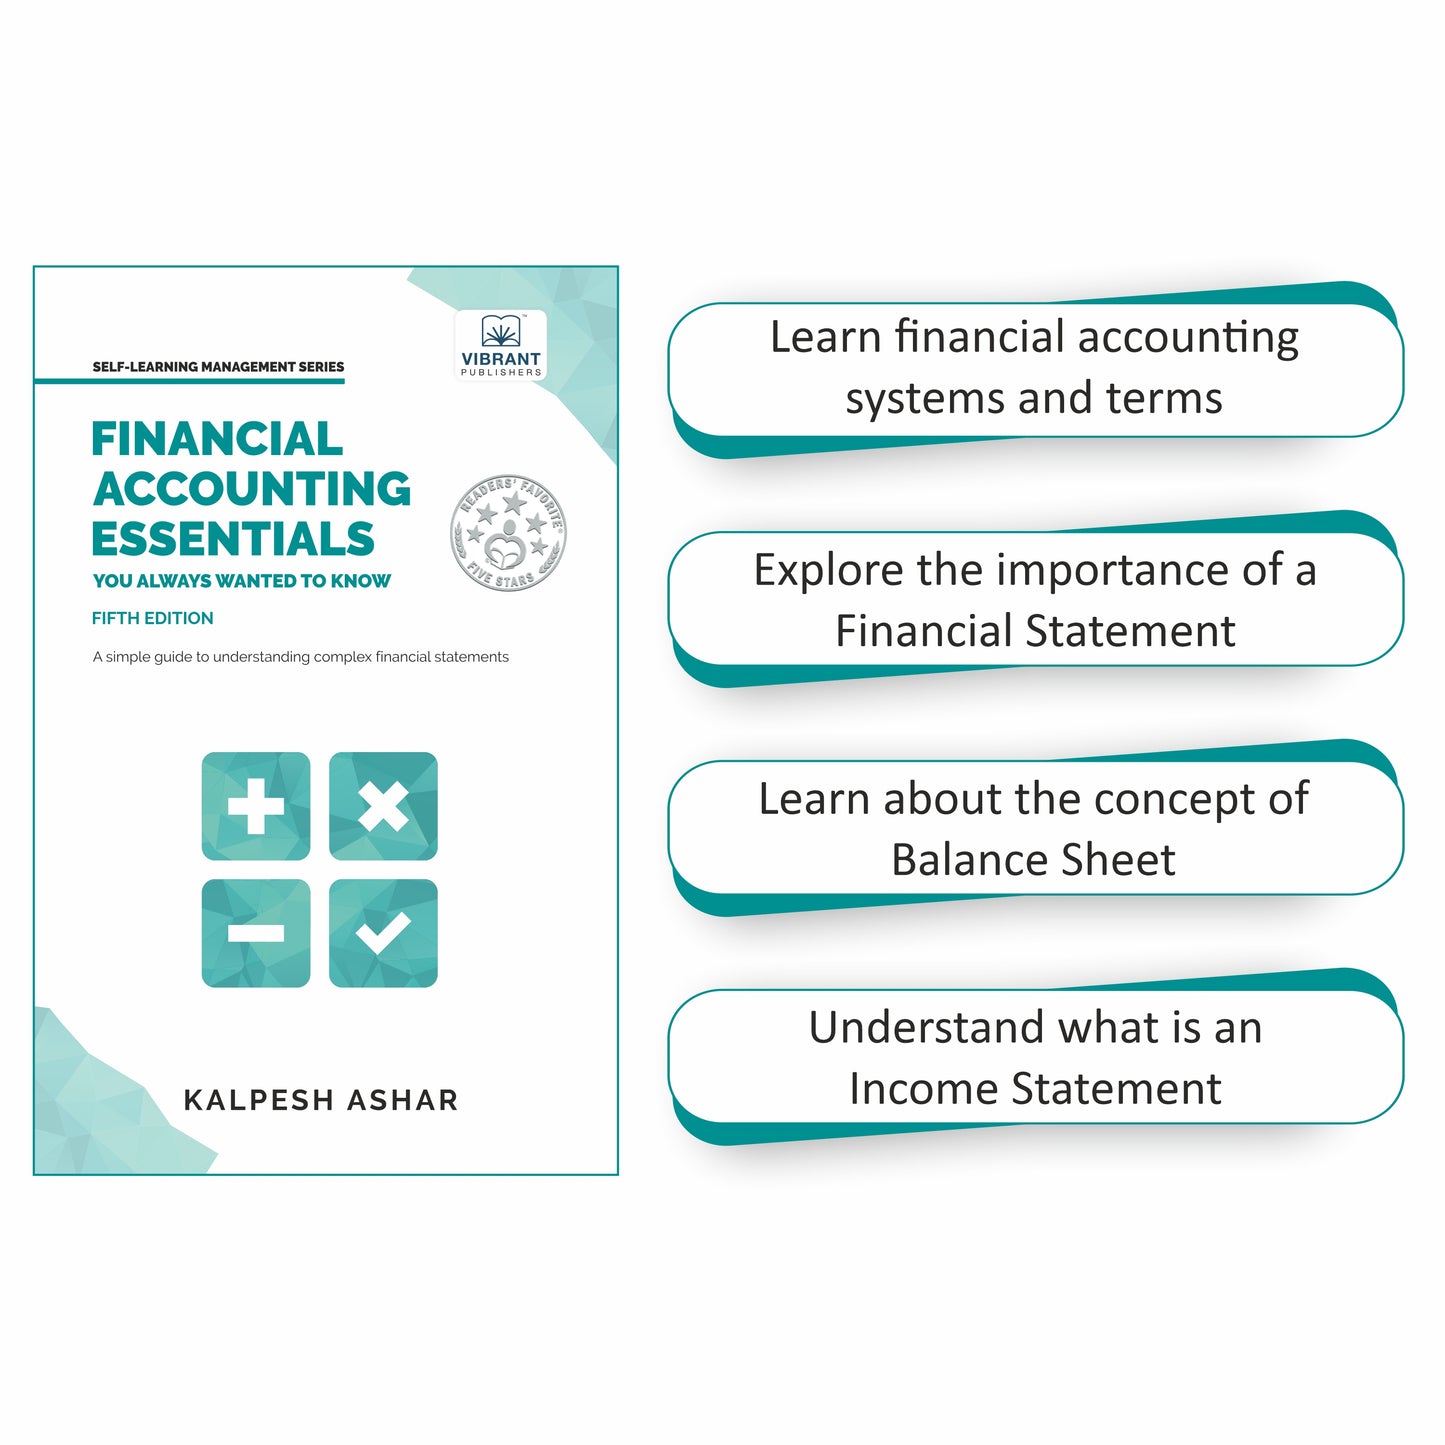 Microeconomics and Finance Essentials - Includes books on Microeconomics, Financial Accounting, Financial Management, Cost Accounting & Management